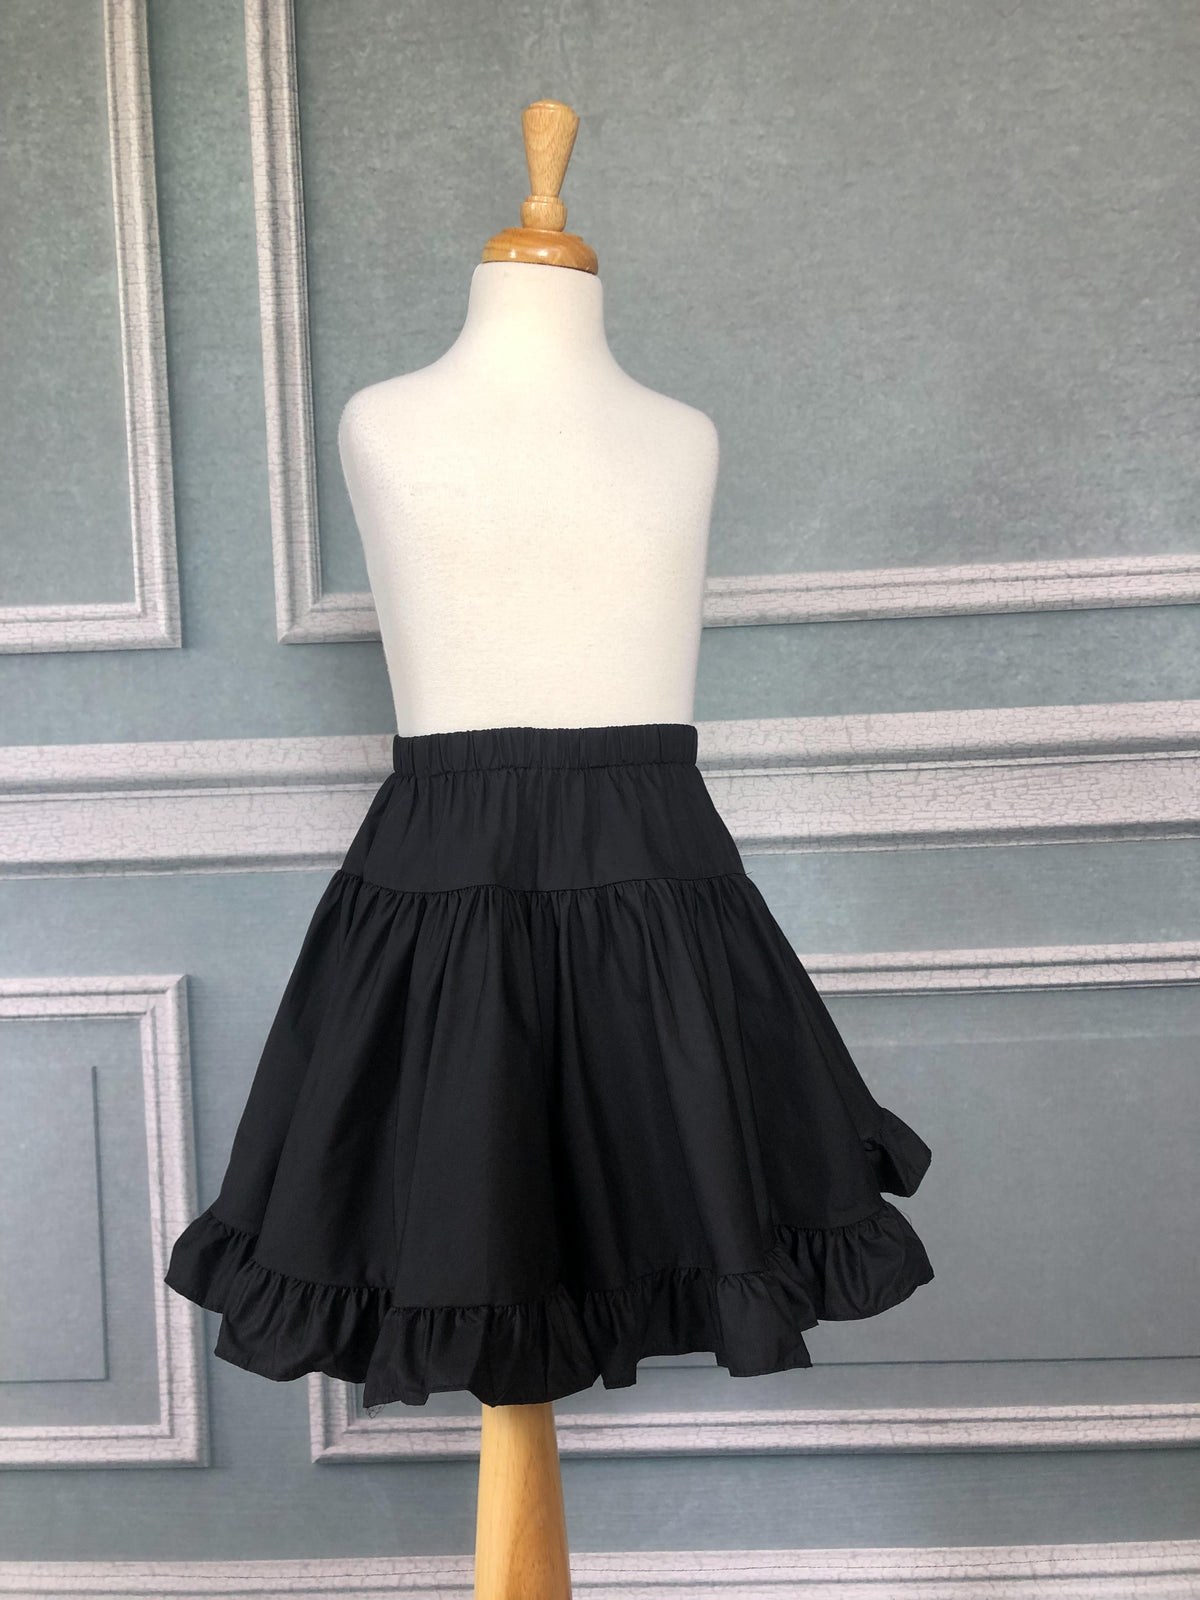 100% cotton Pettiskirt with ruffle layers in Black